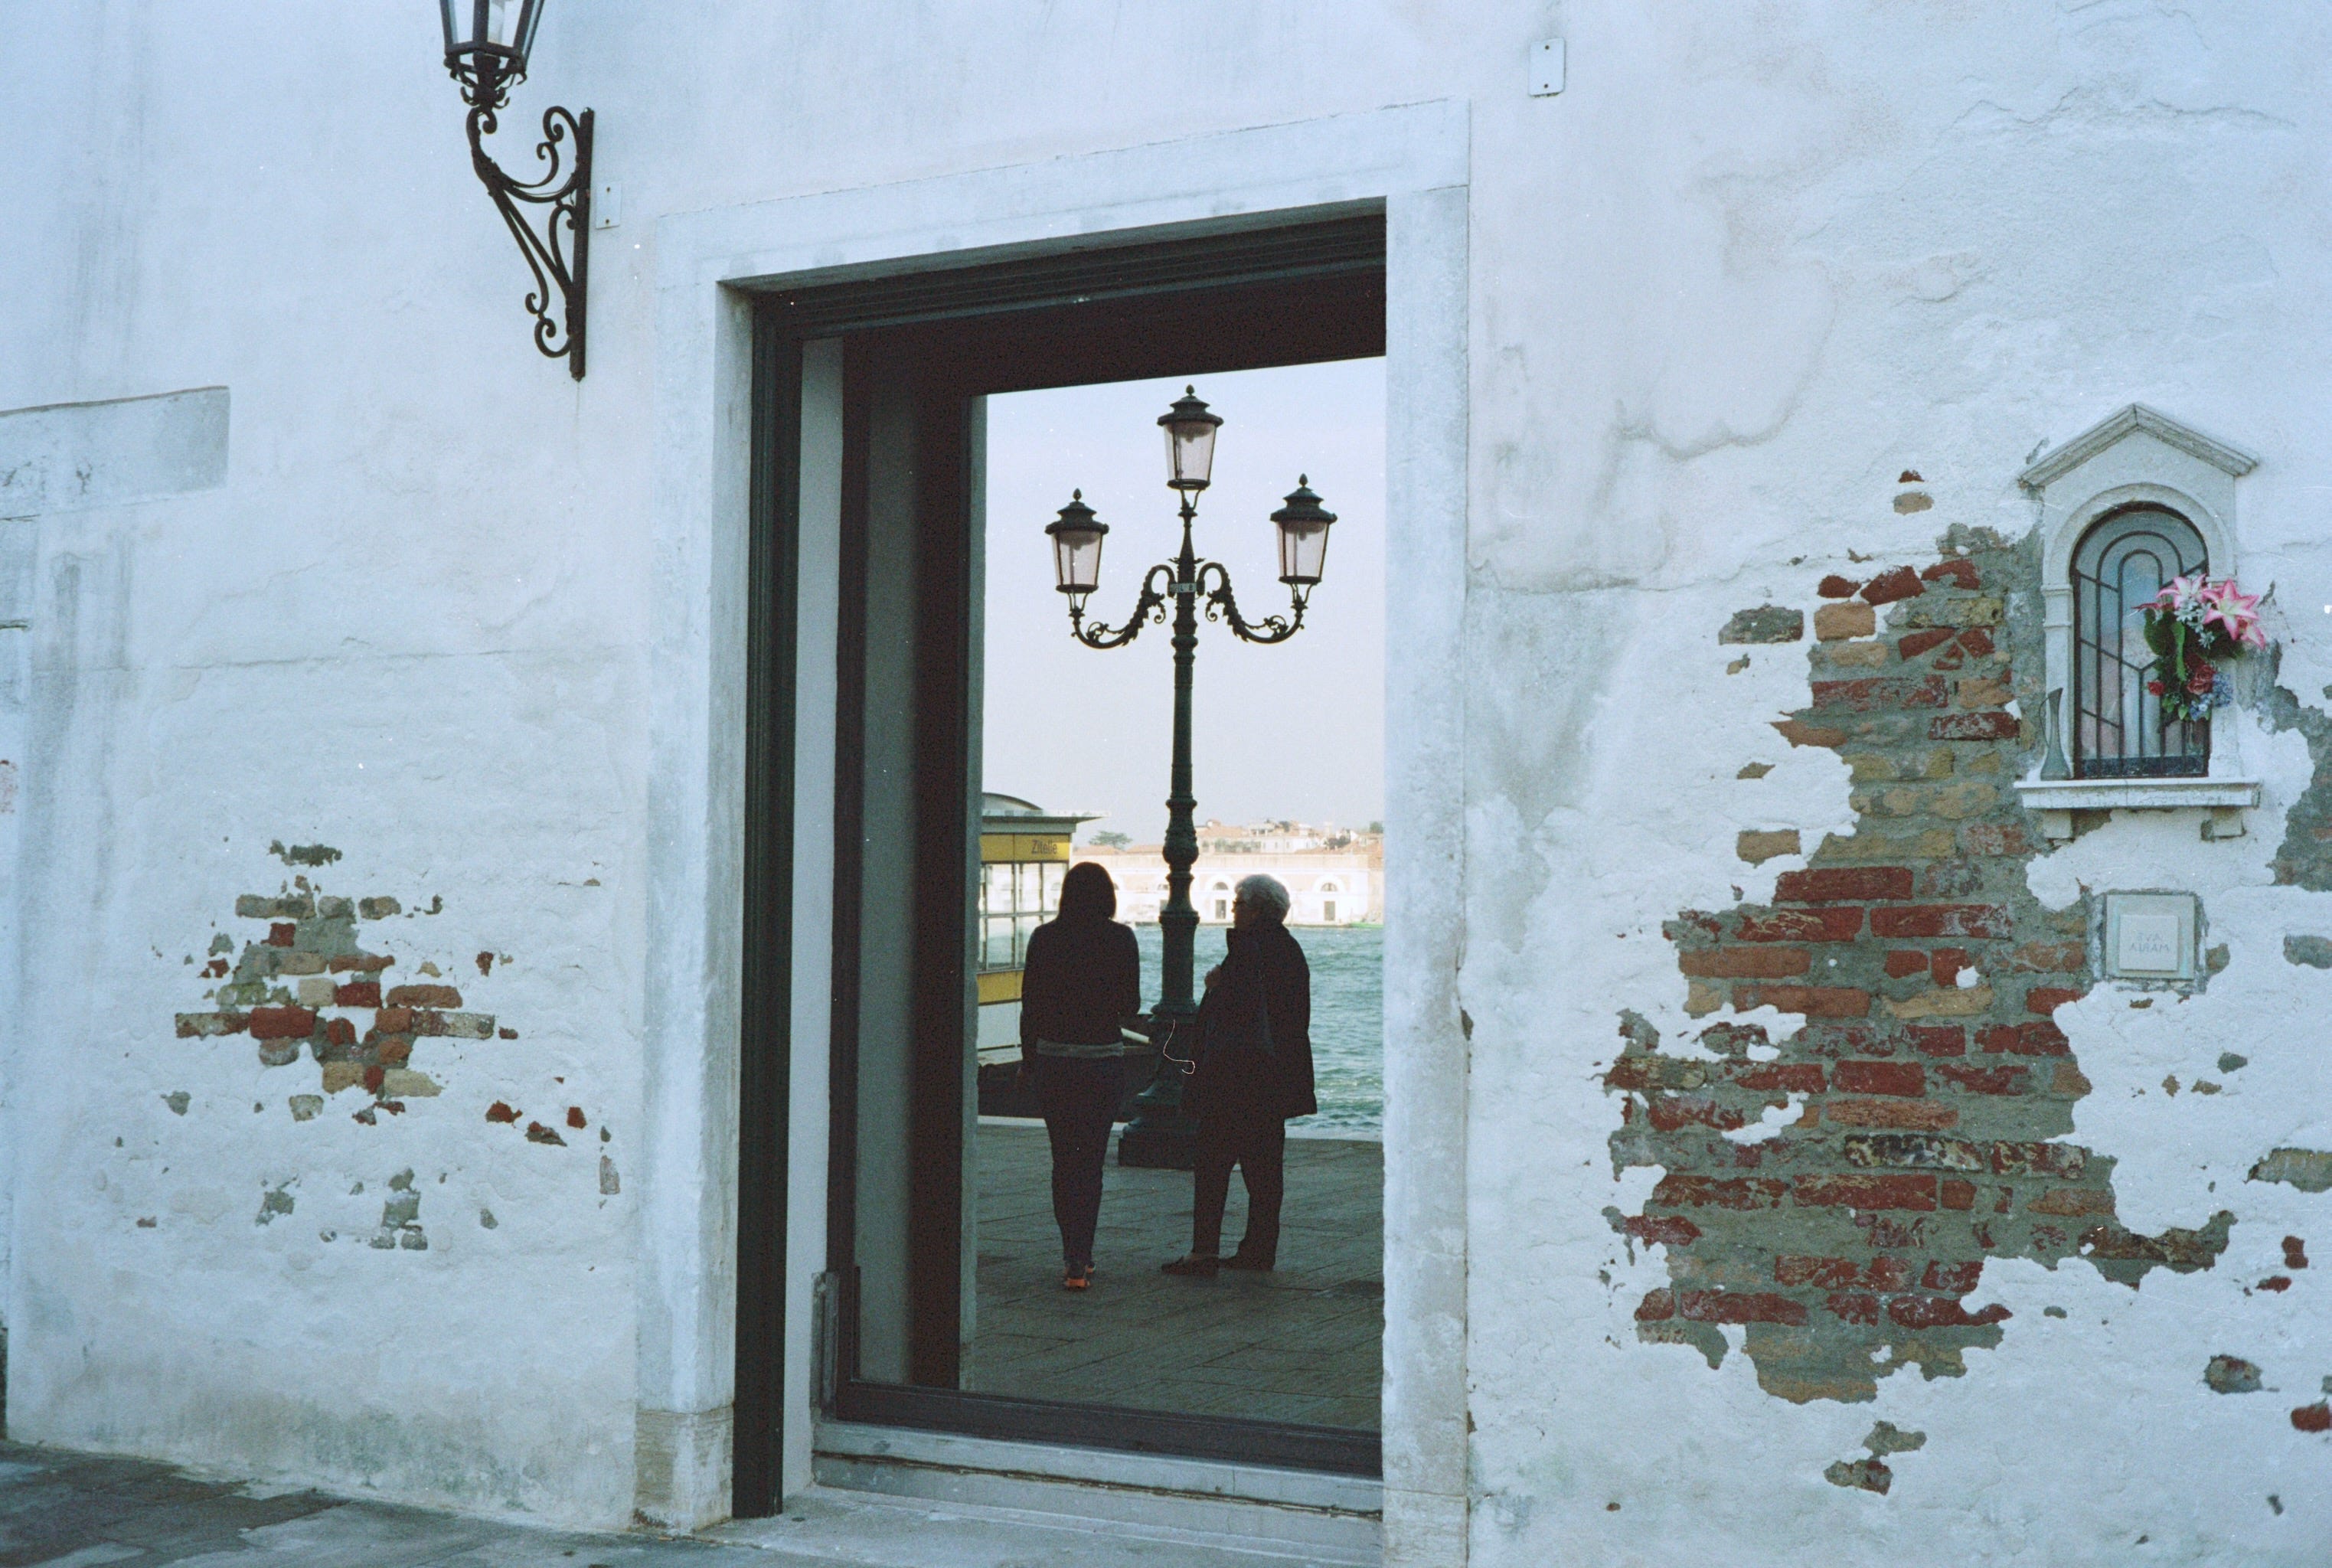 At the side of a building, people are reflected in the window. There is a lamppost and 2 women chatting by the waters of Venice.